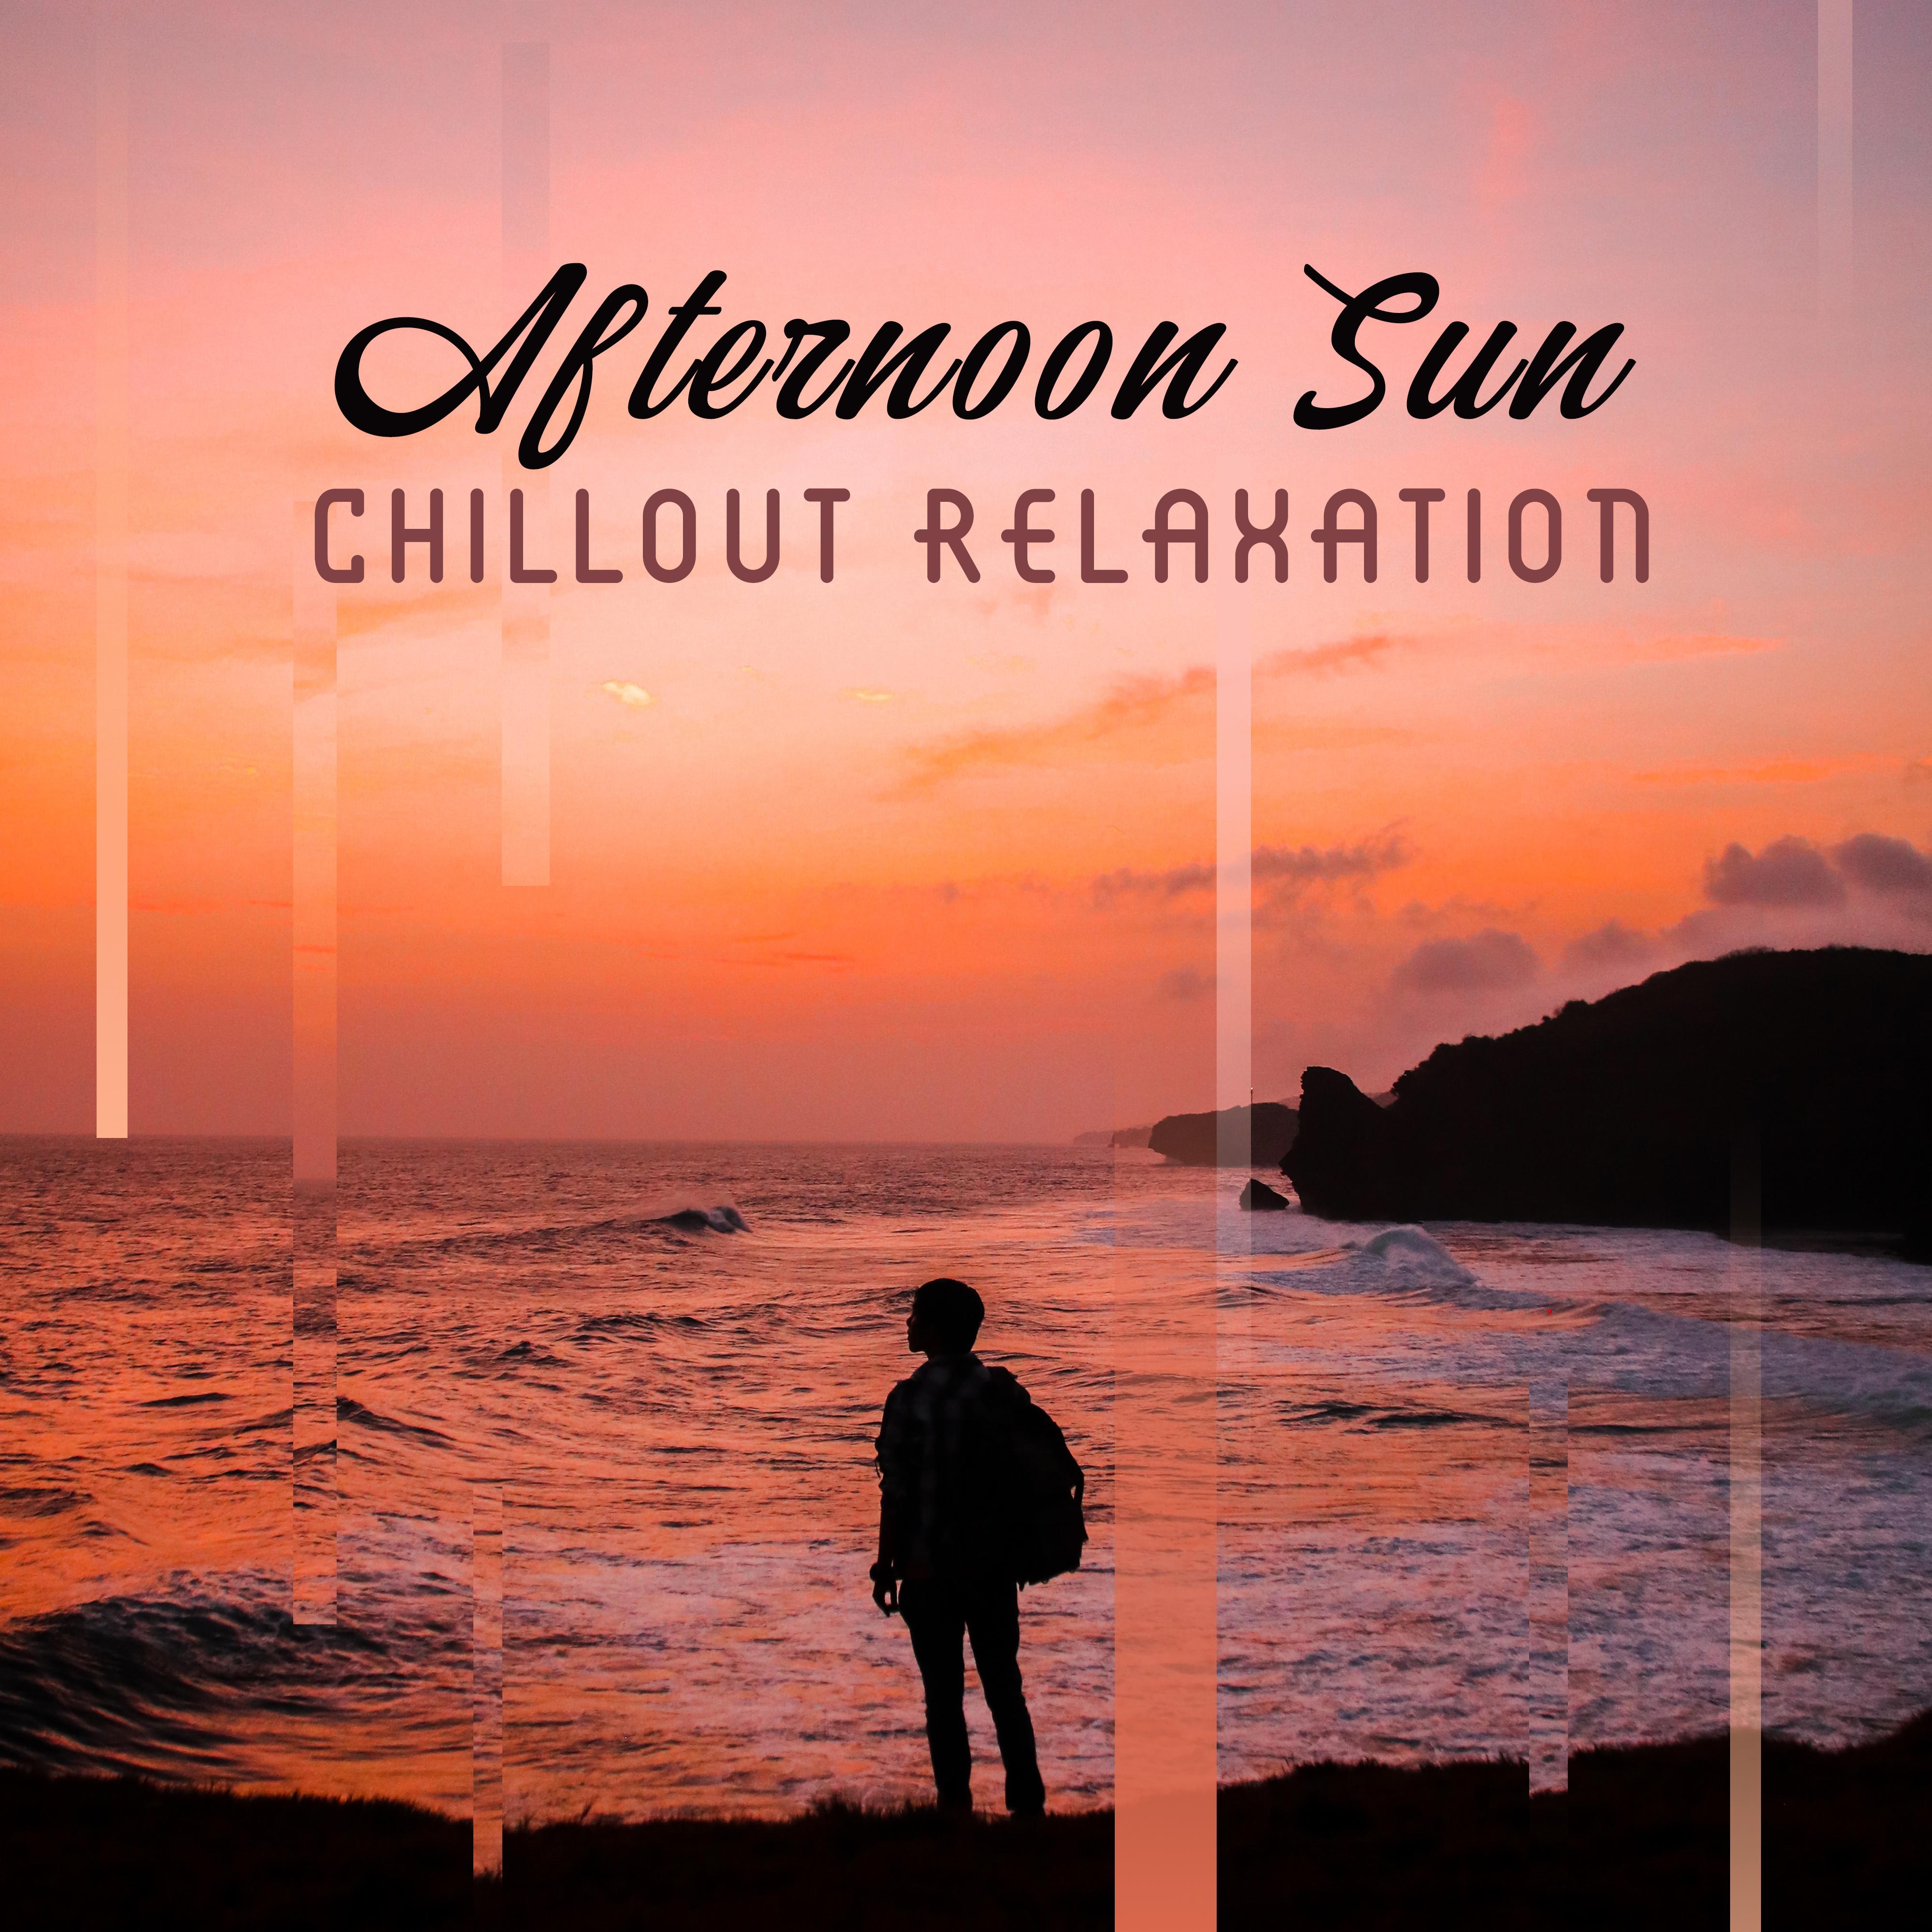 Afternoon Sun Chillout Relaxation: Compilation of Best Chill Out 2019 Vibes for Relax & Rest Under the Sun, Ambient Melodies & Deep Beats for Summer Vacation